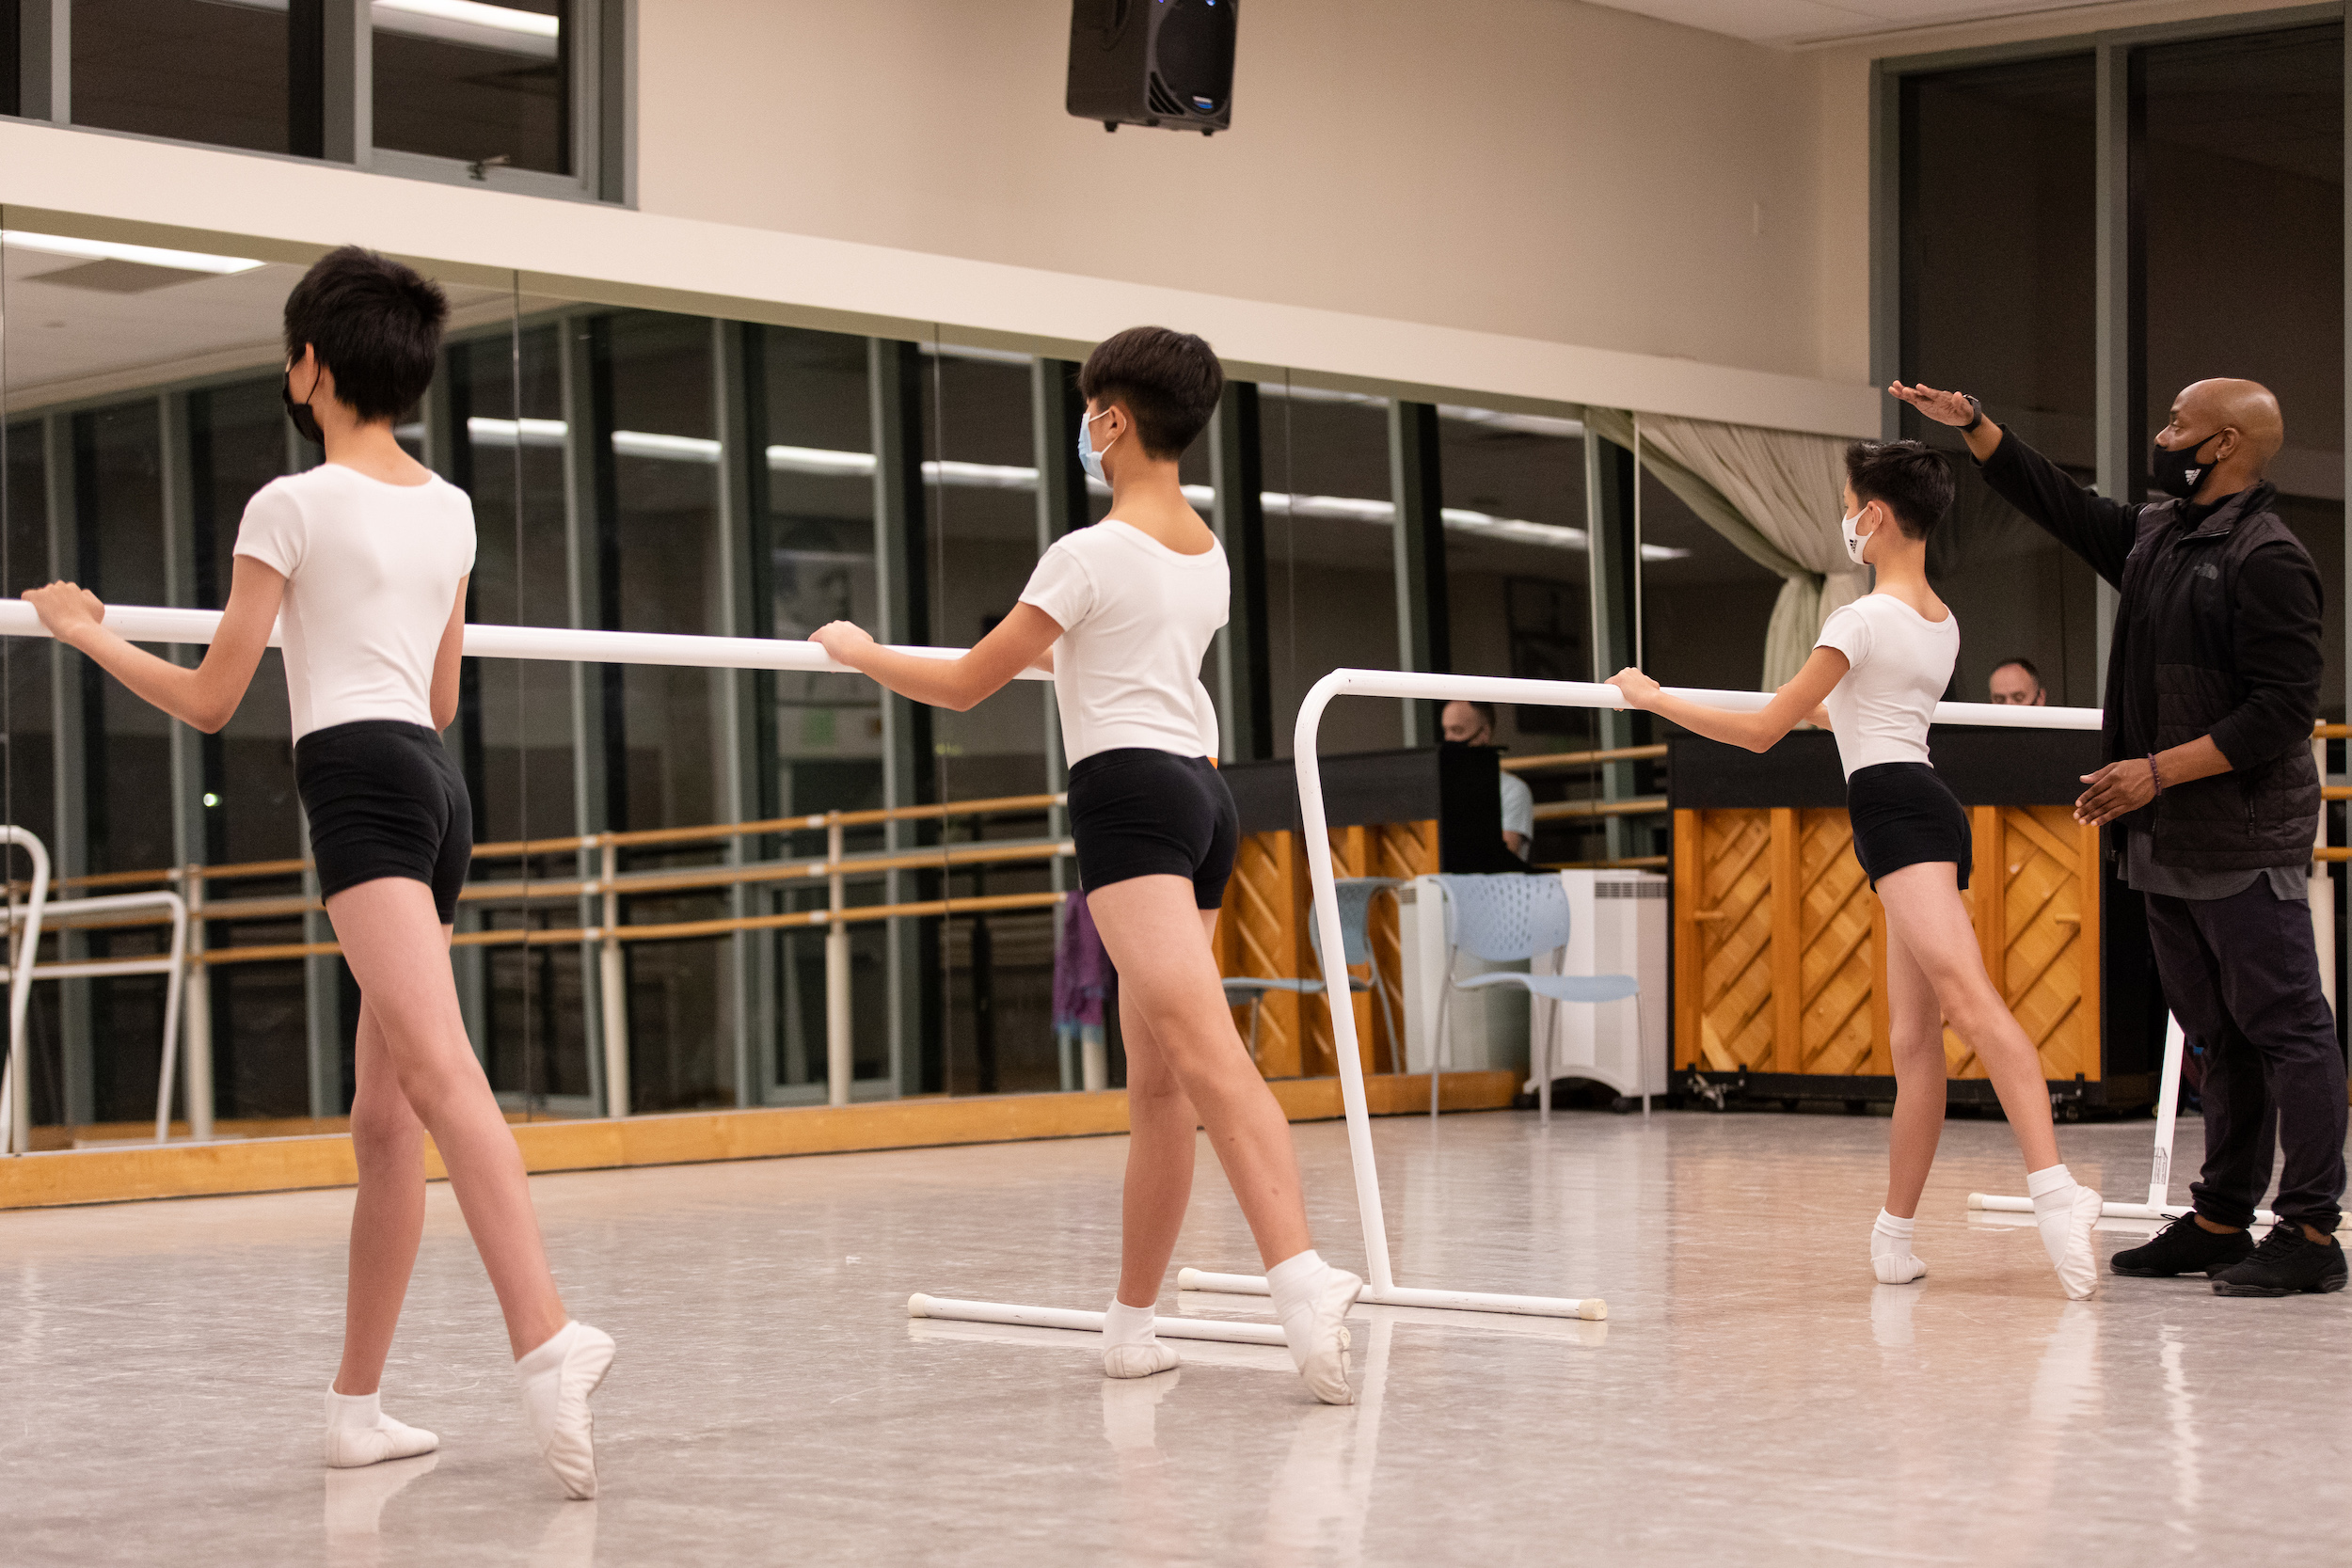 Three young boys stand with their left leg in tendu derriere facing the barre in front of a mirror in a large dance studio. They wear white T-shirts, black shorts, white socks and ballet slippers and face masks. Jason Ambrose, wearing black athletic clothing, dance sneakers, and a black face mask, stands at the end of the barre with his hand above one boy's head, as if instructing him to stand taller.